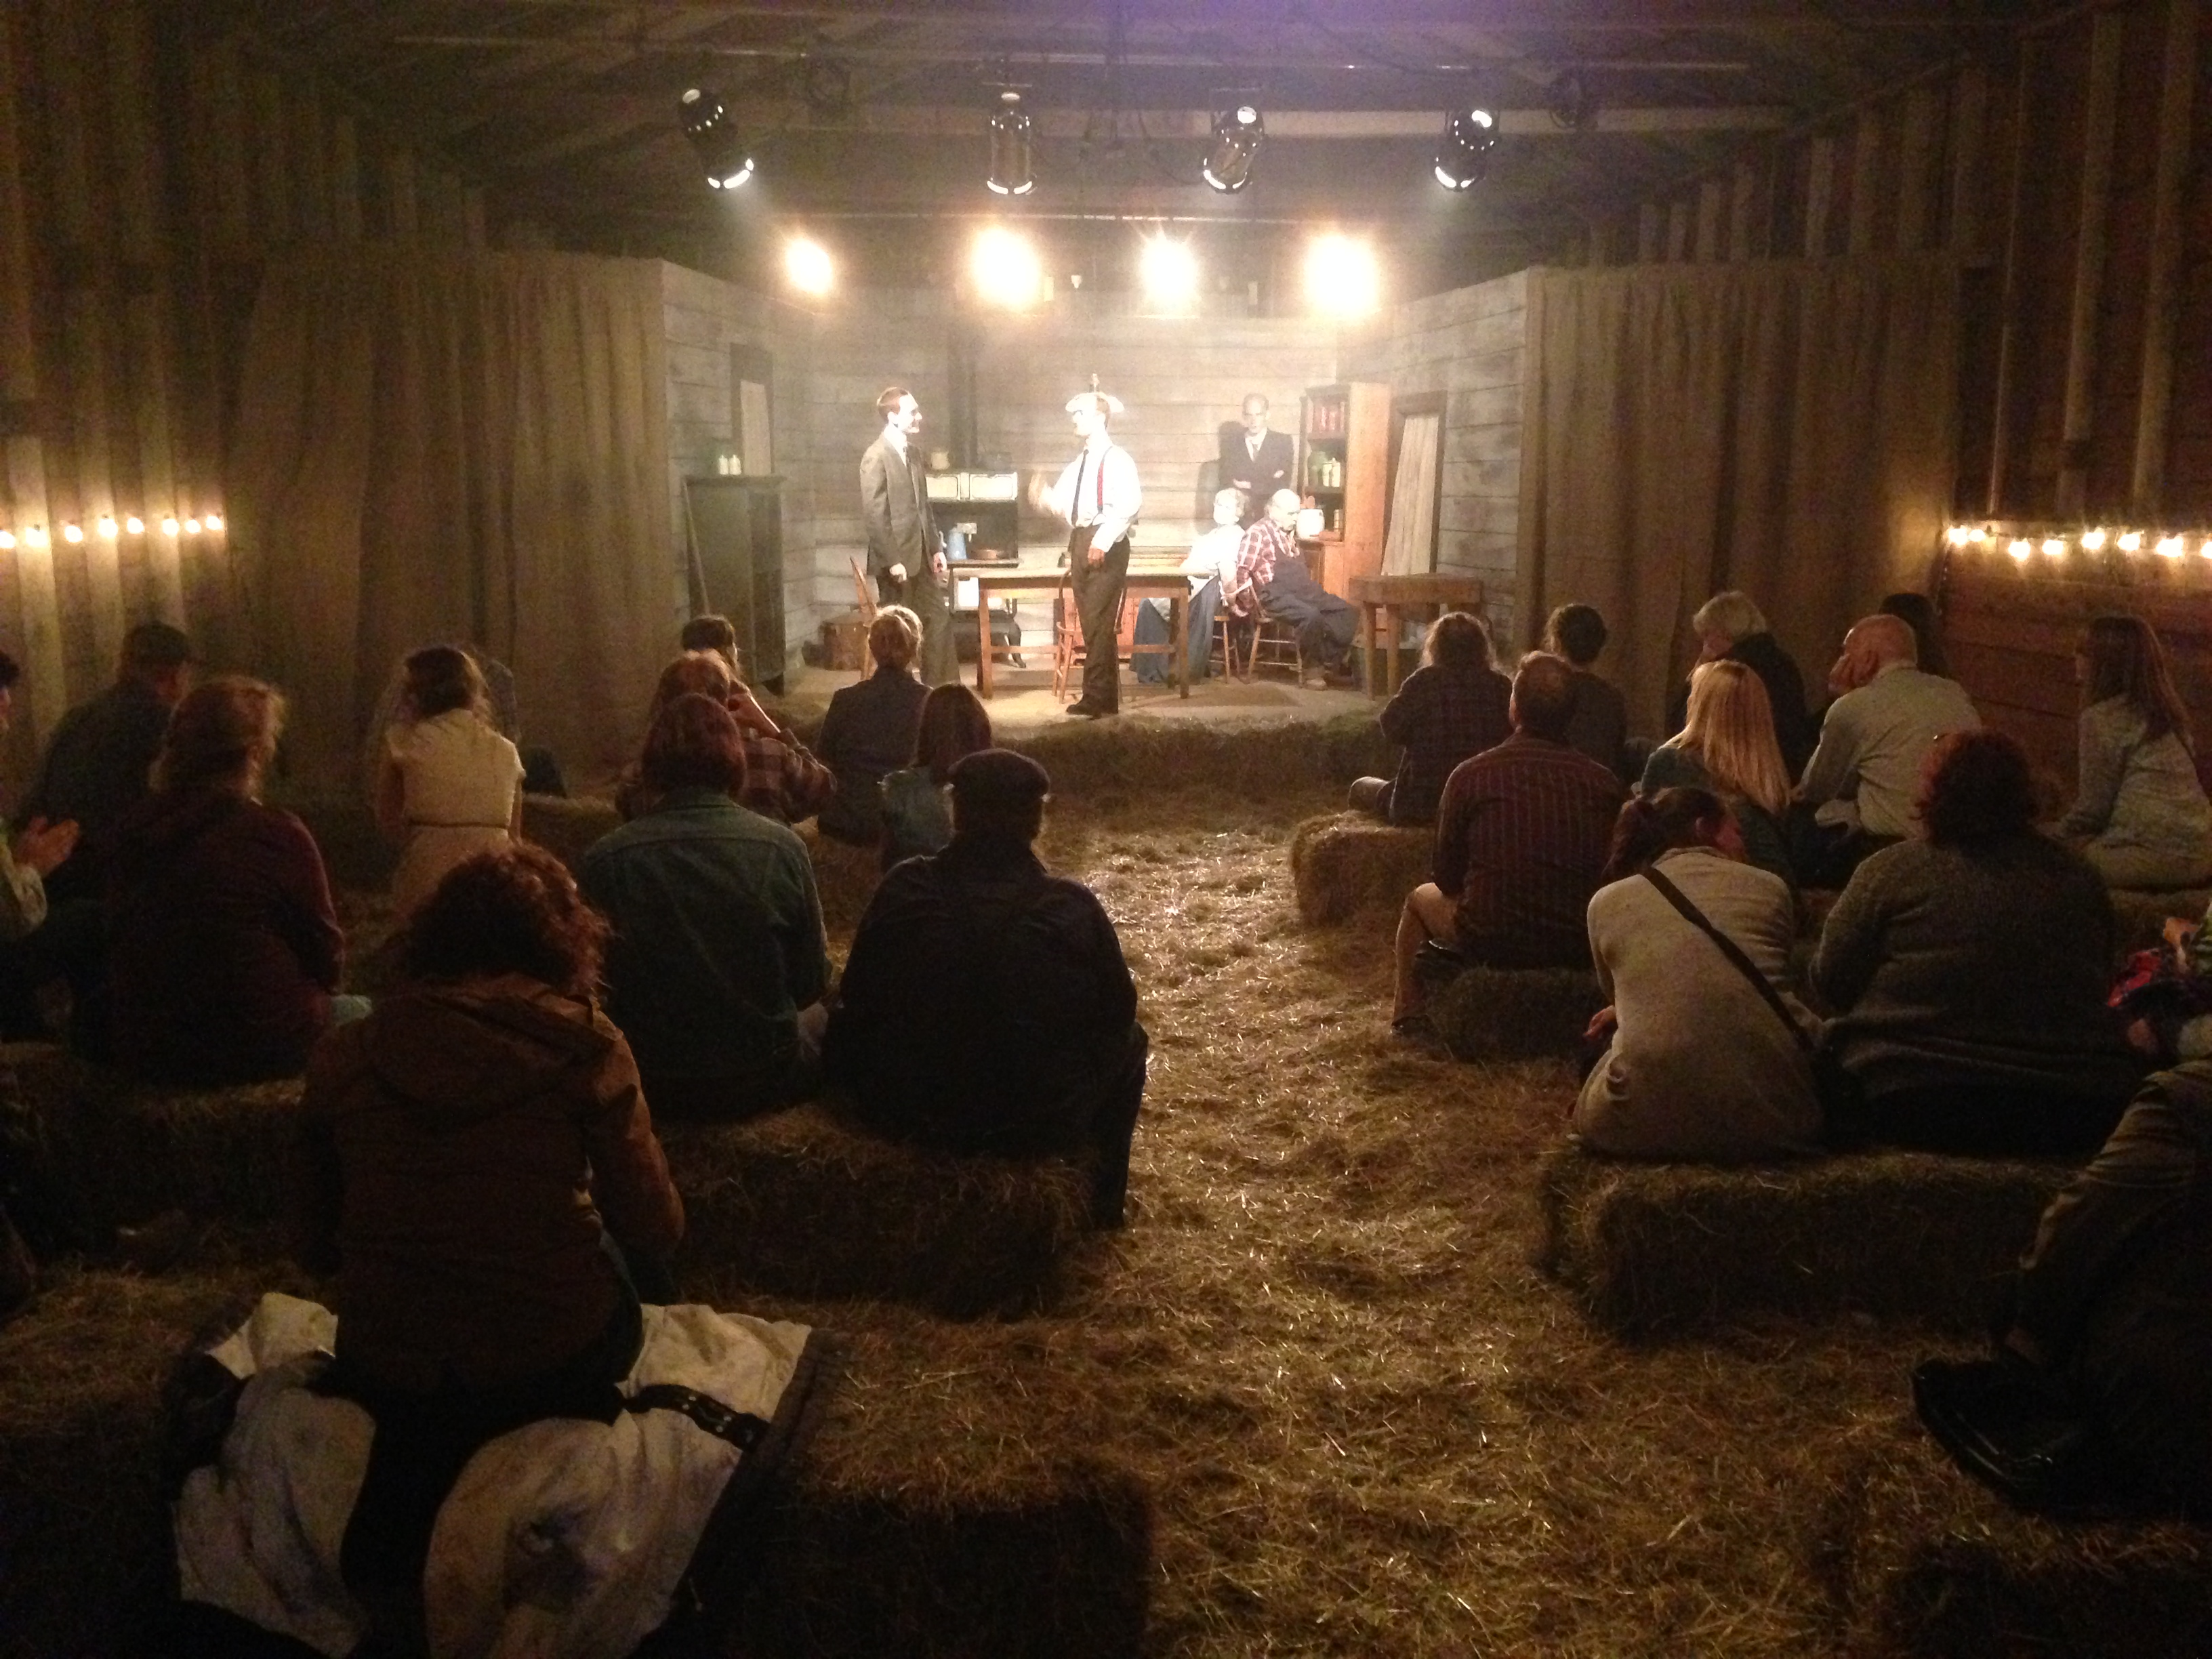 The Driftless Area - Farm Shed Theatre